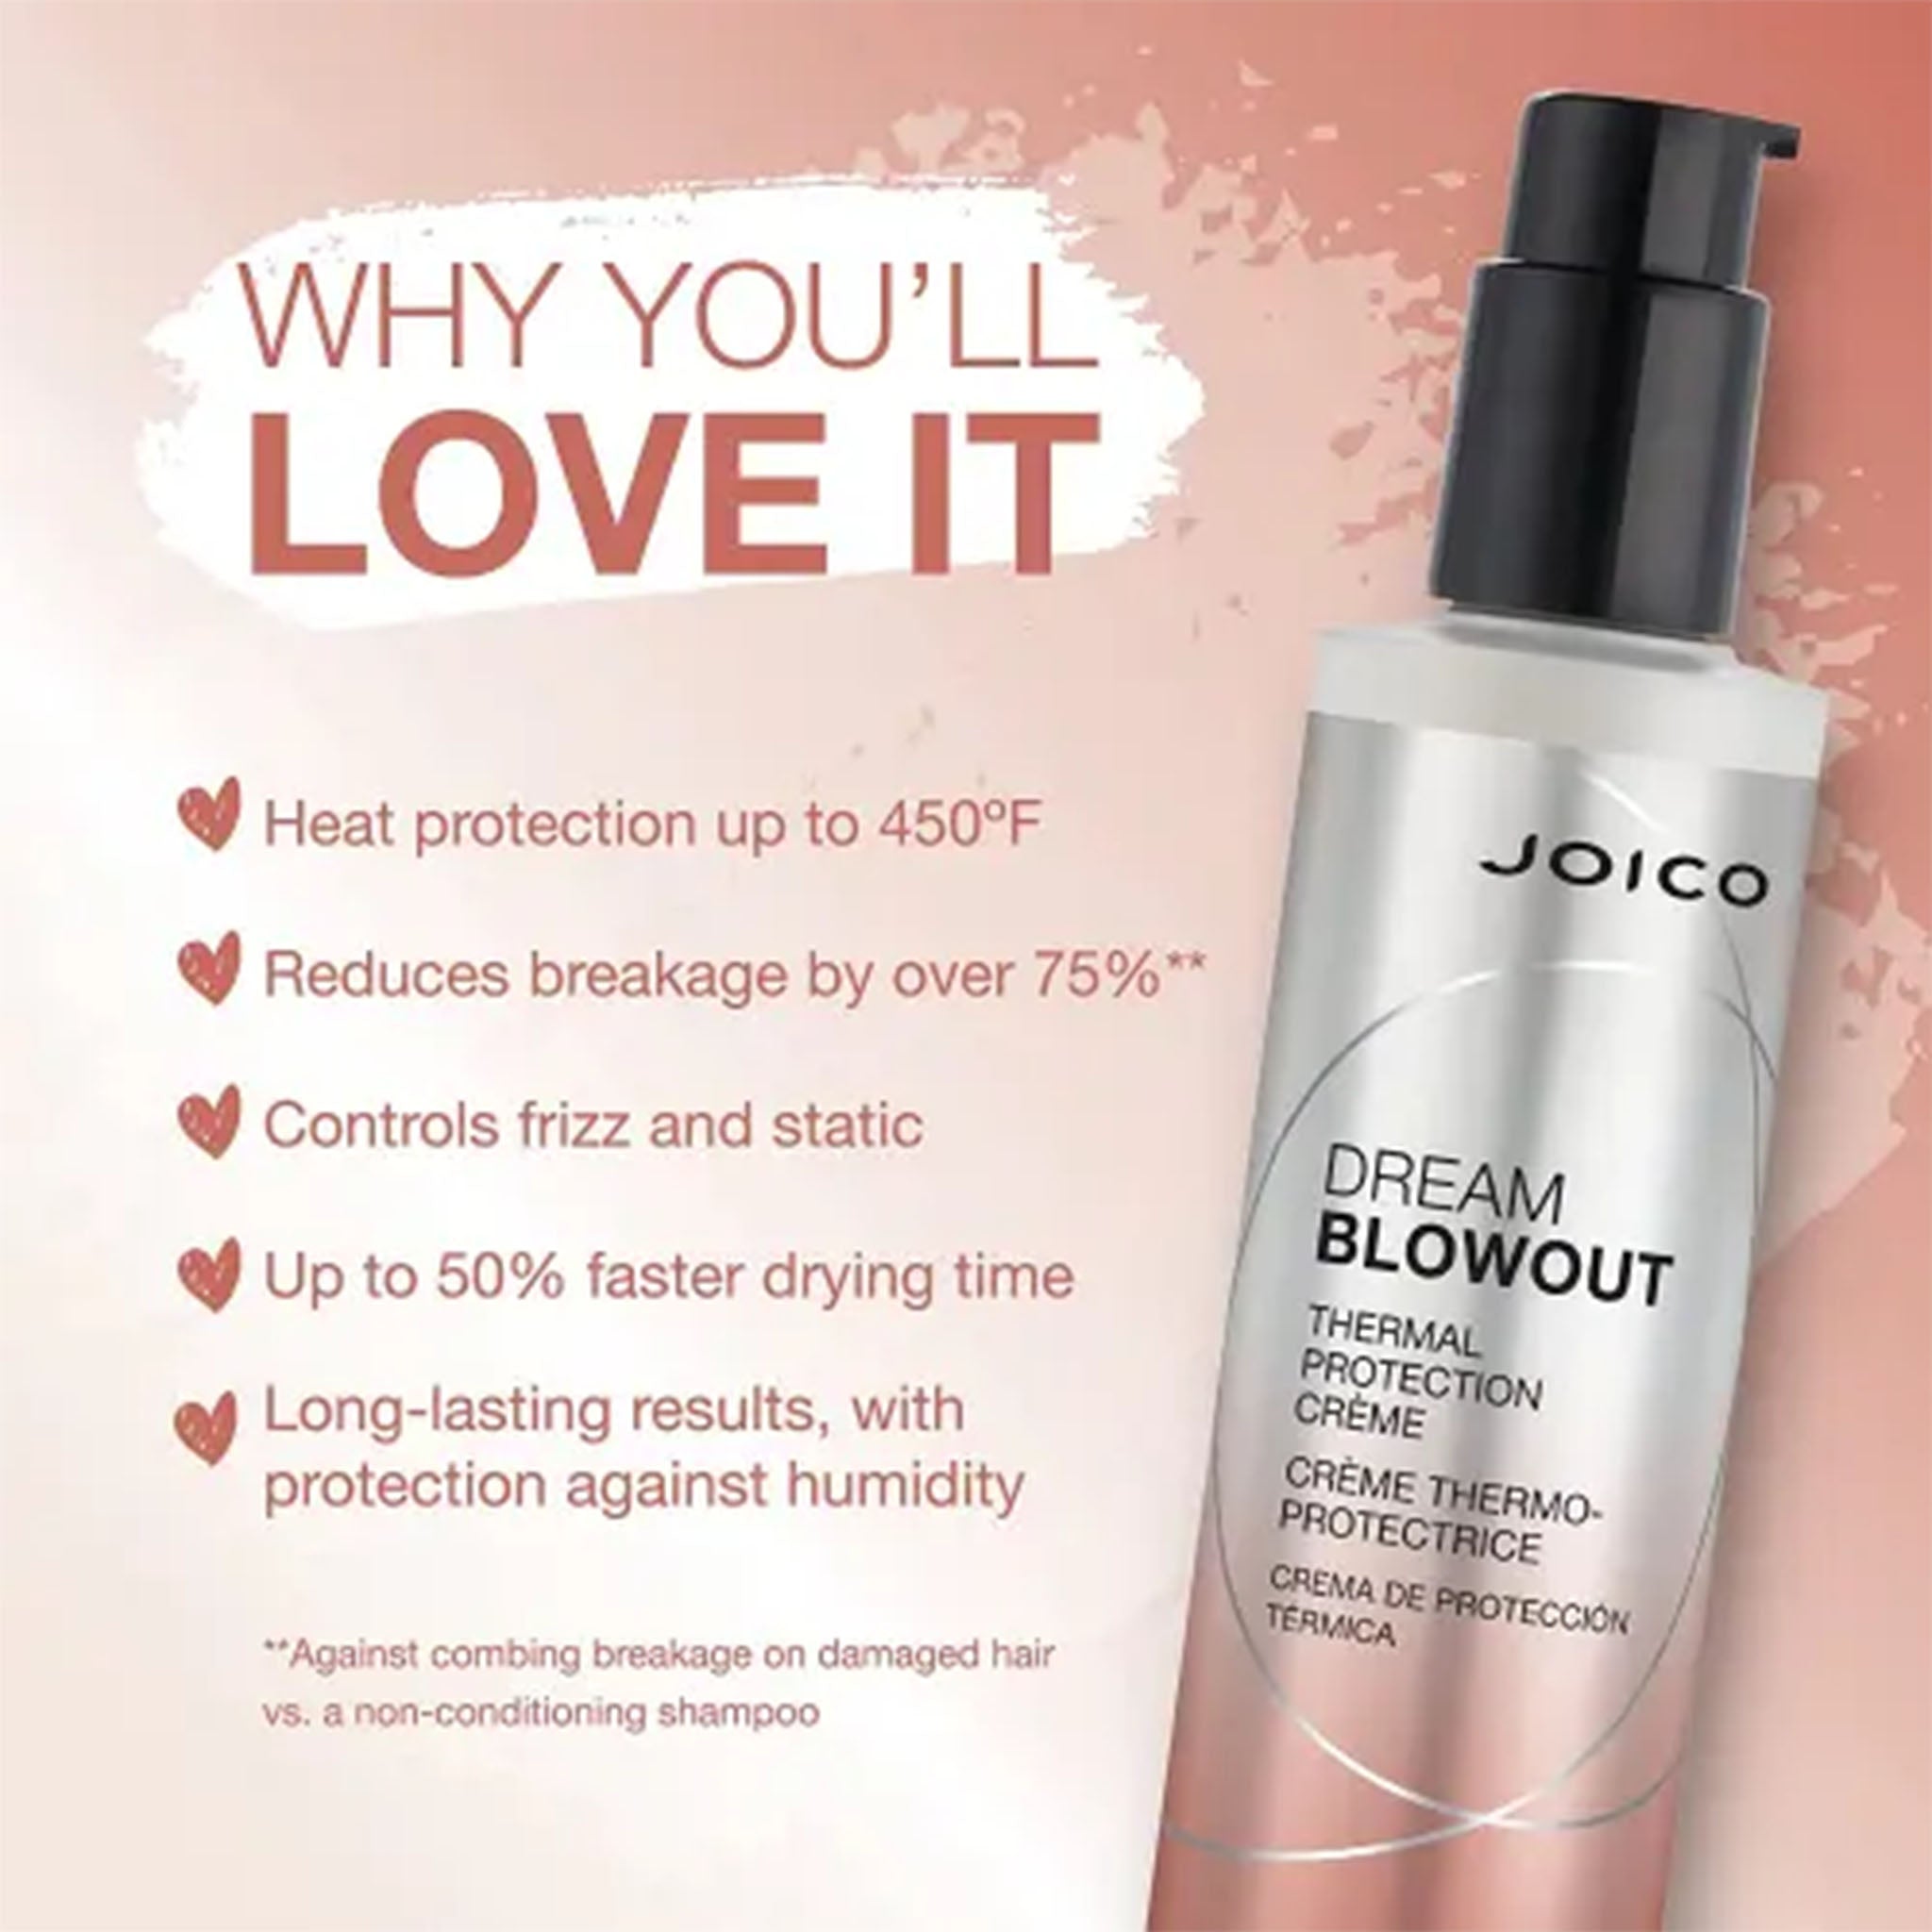 Joico. Creme Thermo-Protectrice Dream Blowout - 200 ml